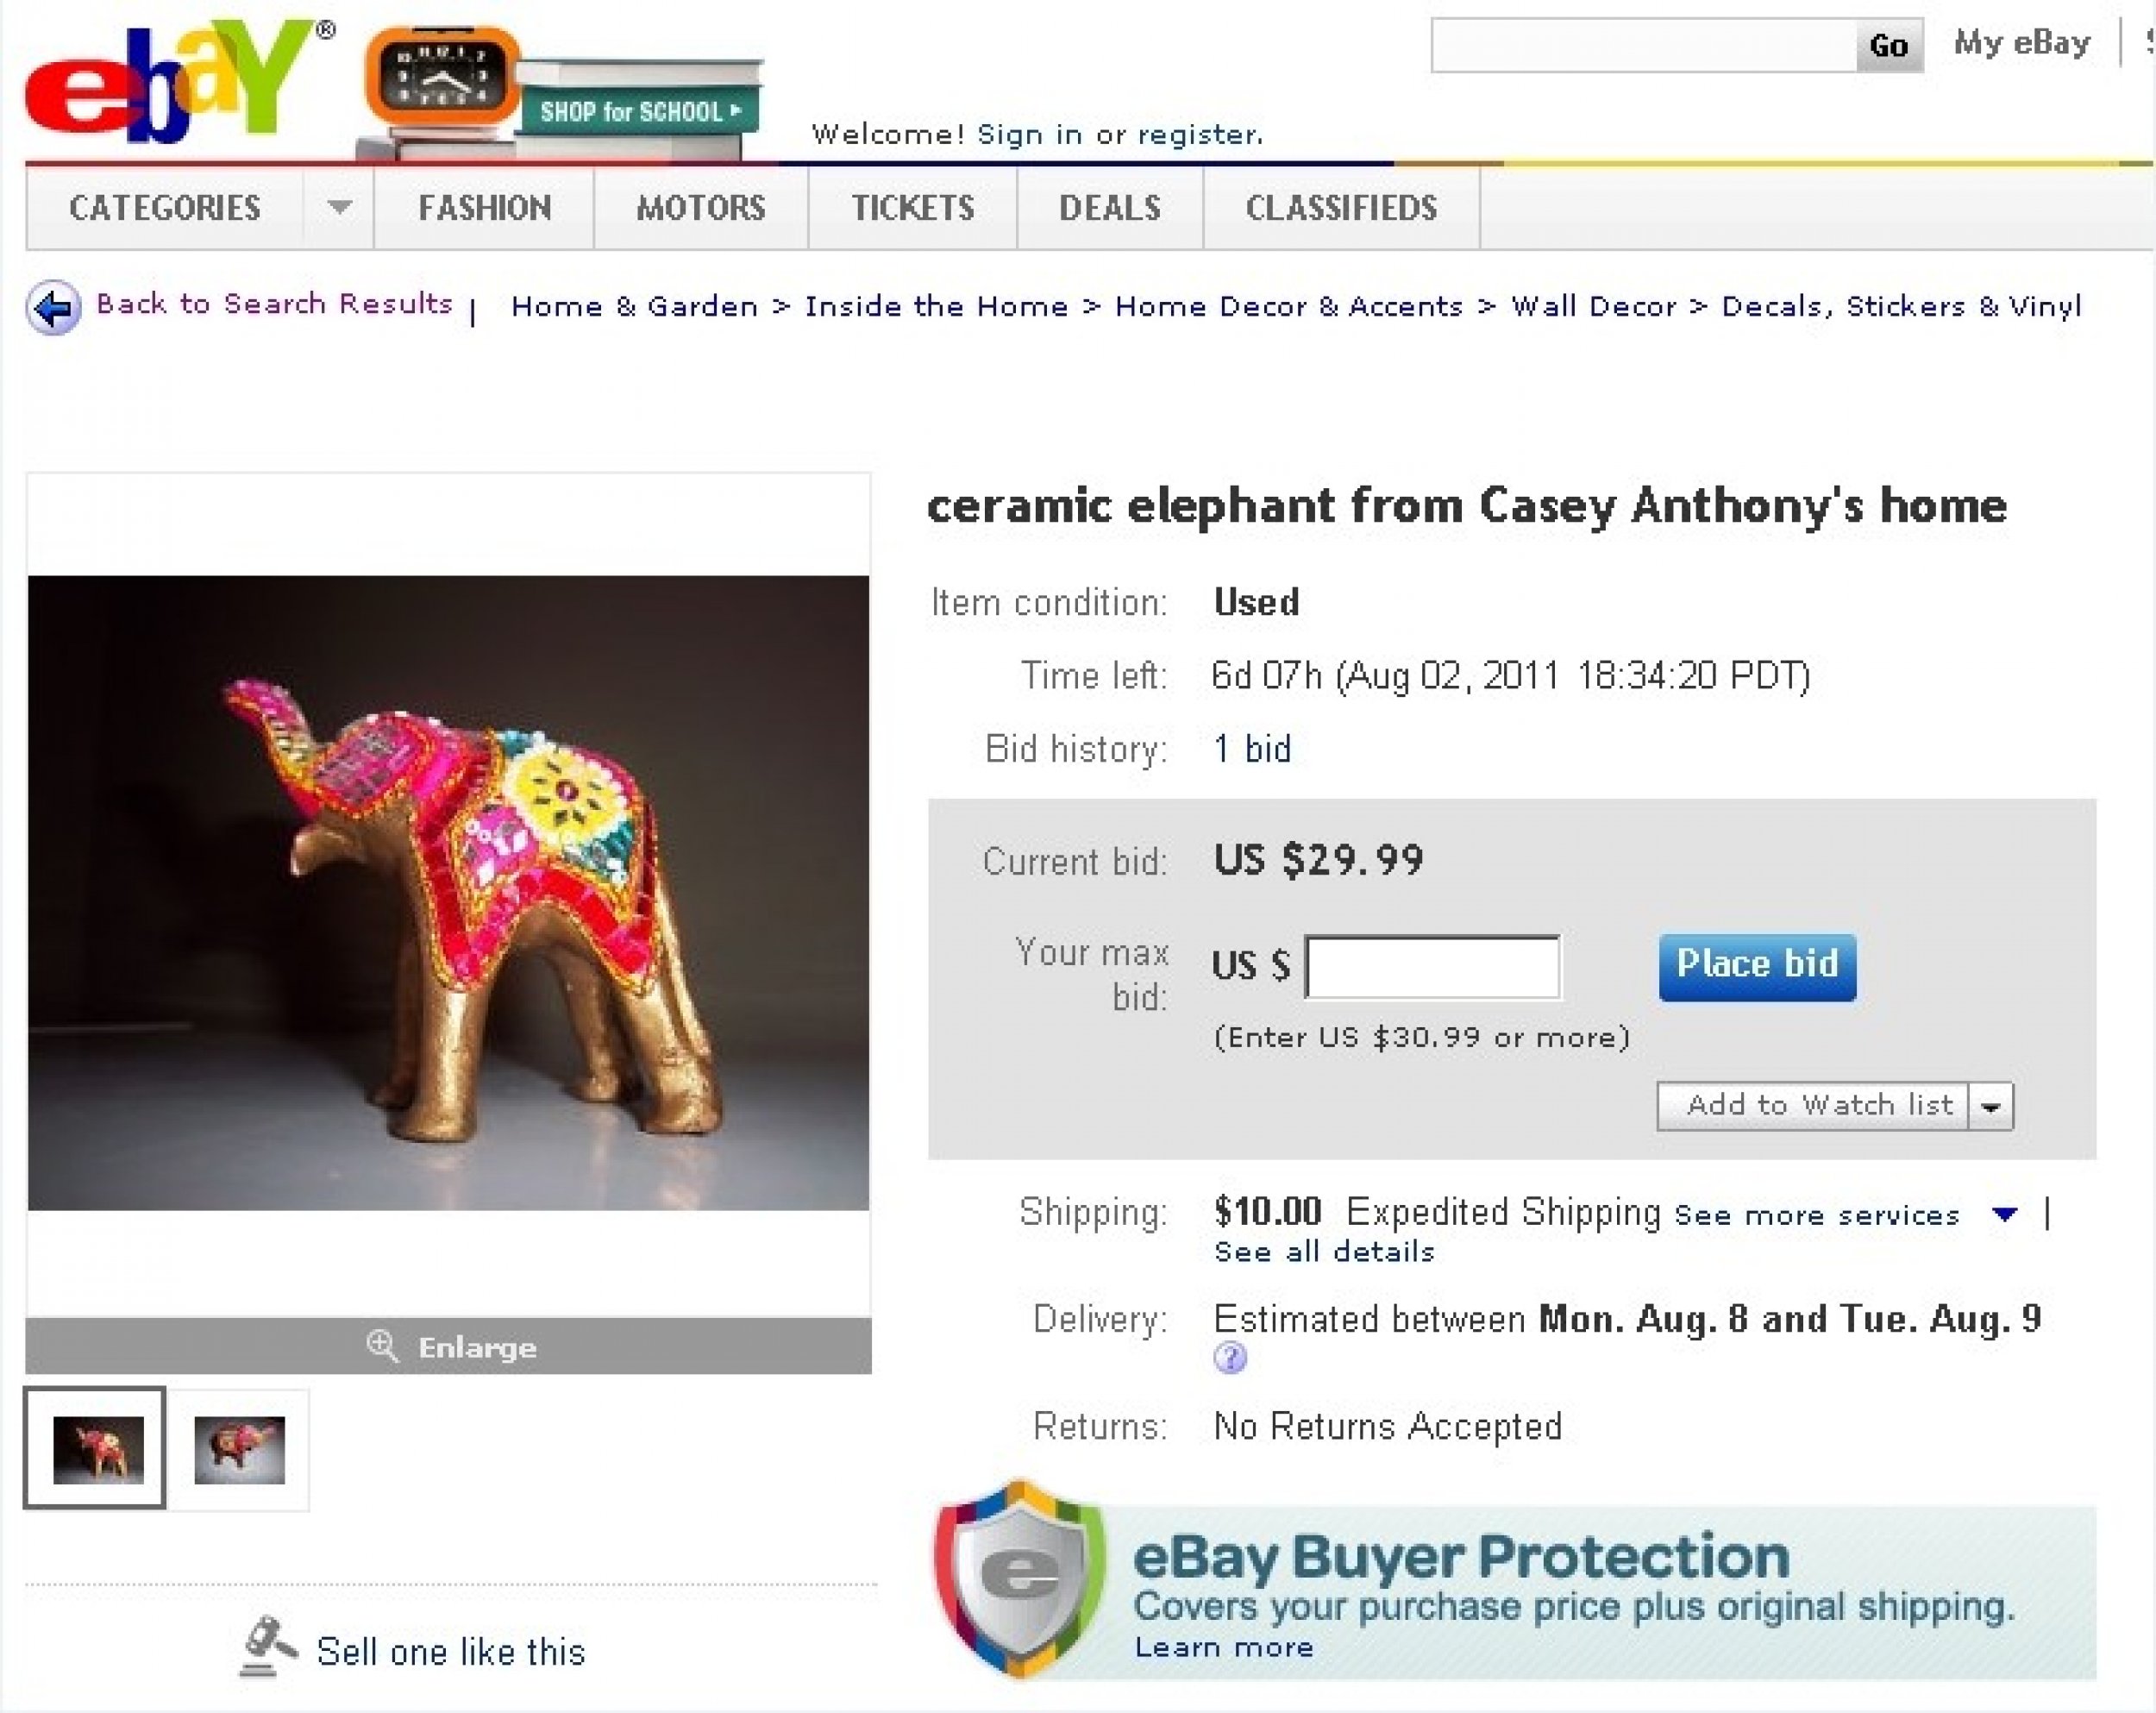 Ceramic elephant from Casey Anthonys home